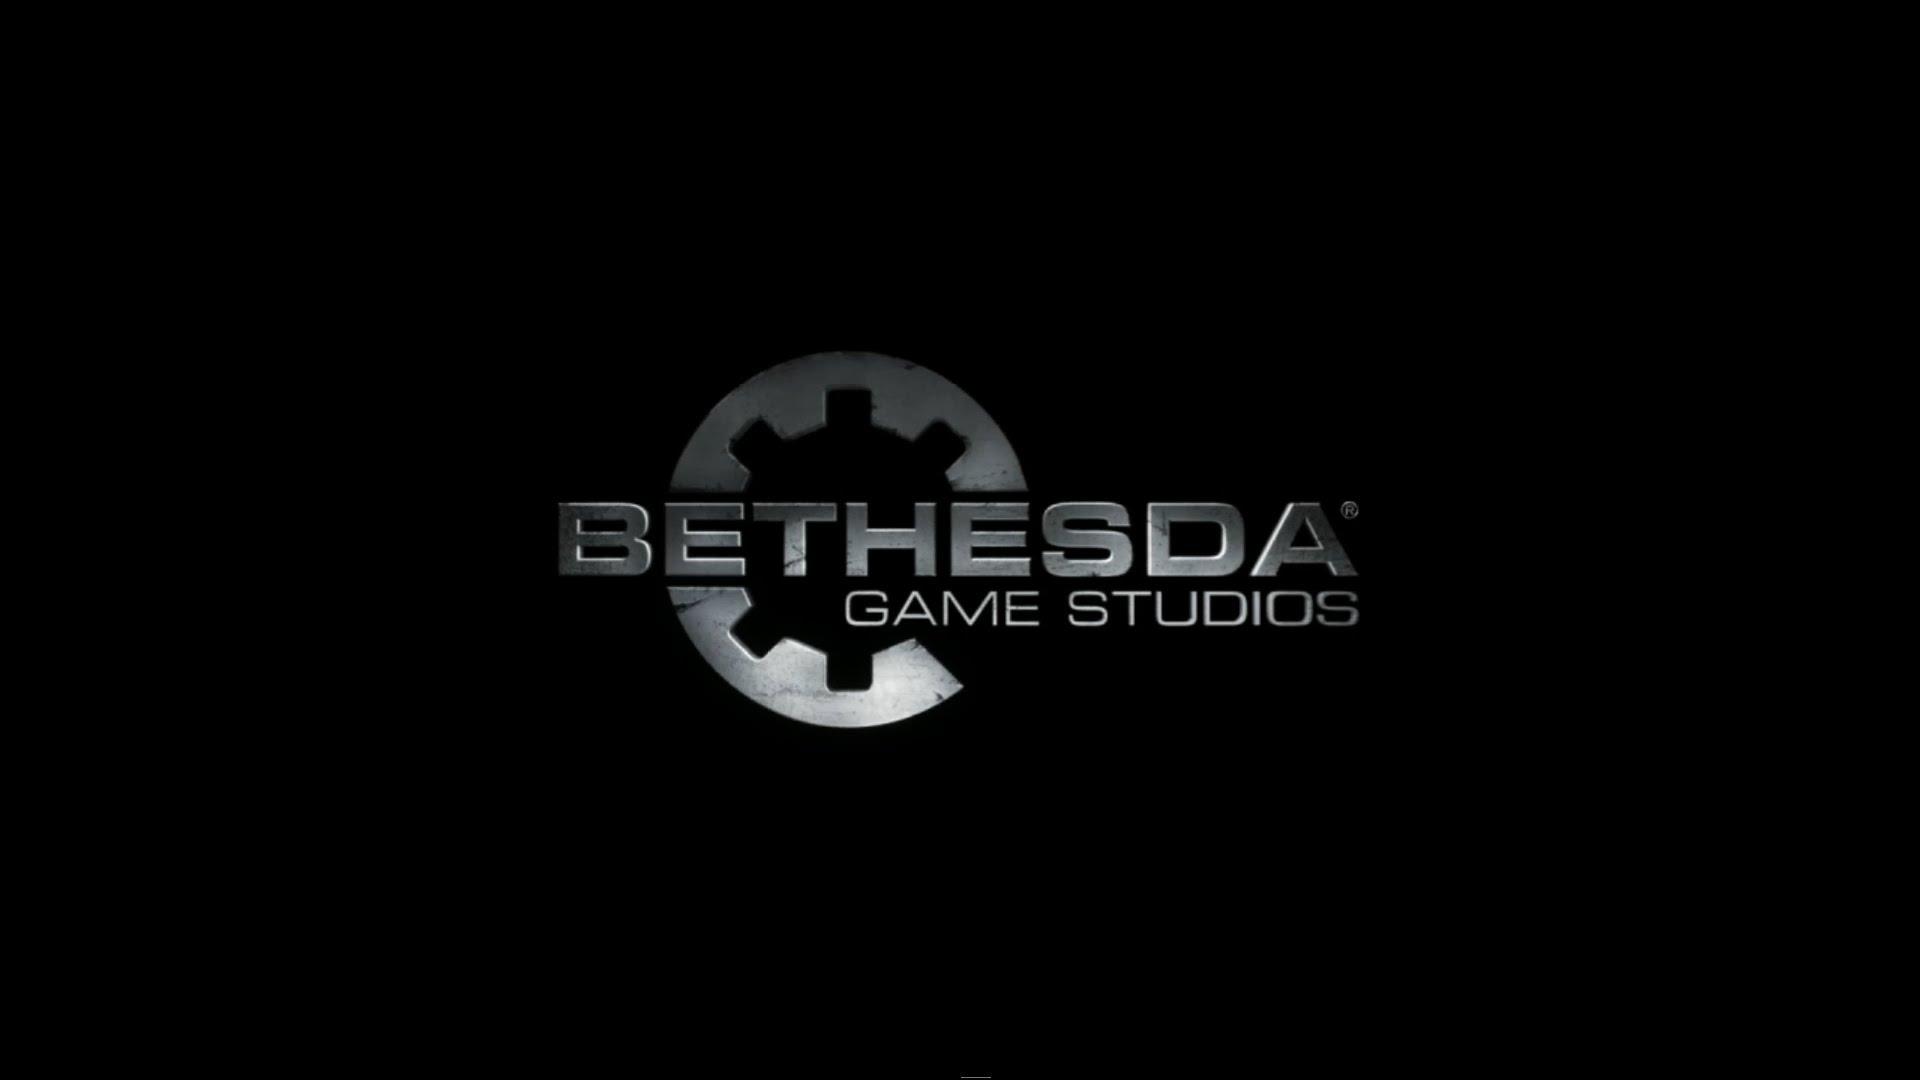 Here's where you can watch Bethesda's E3 2018 press conference